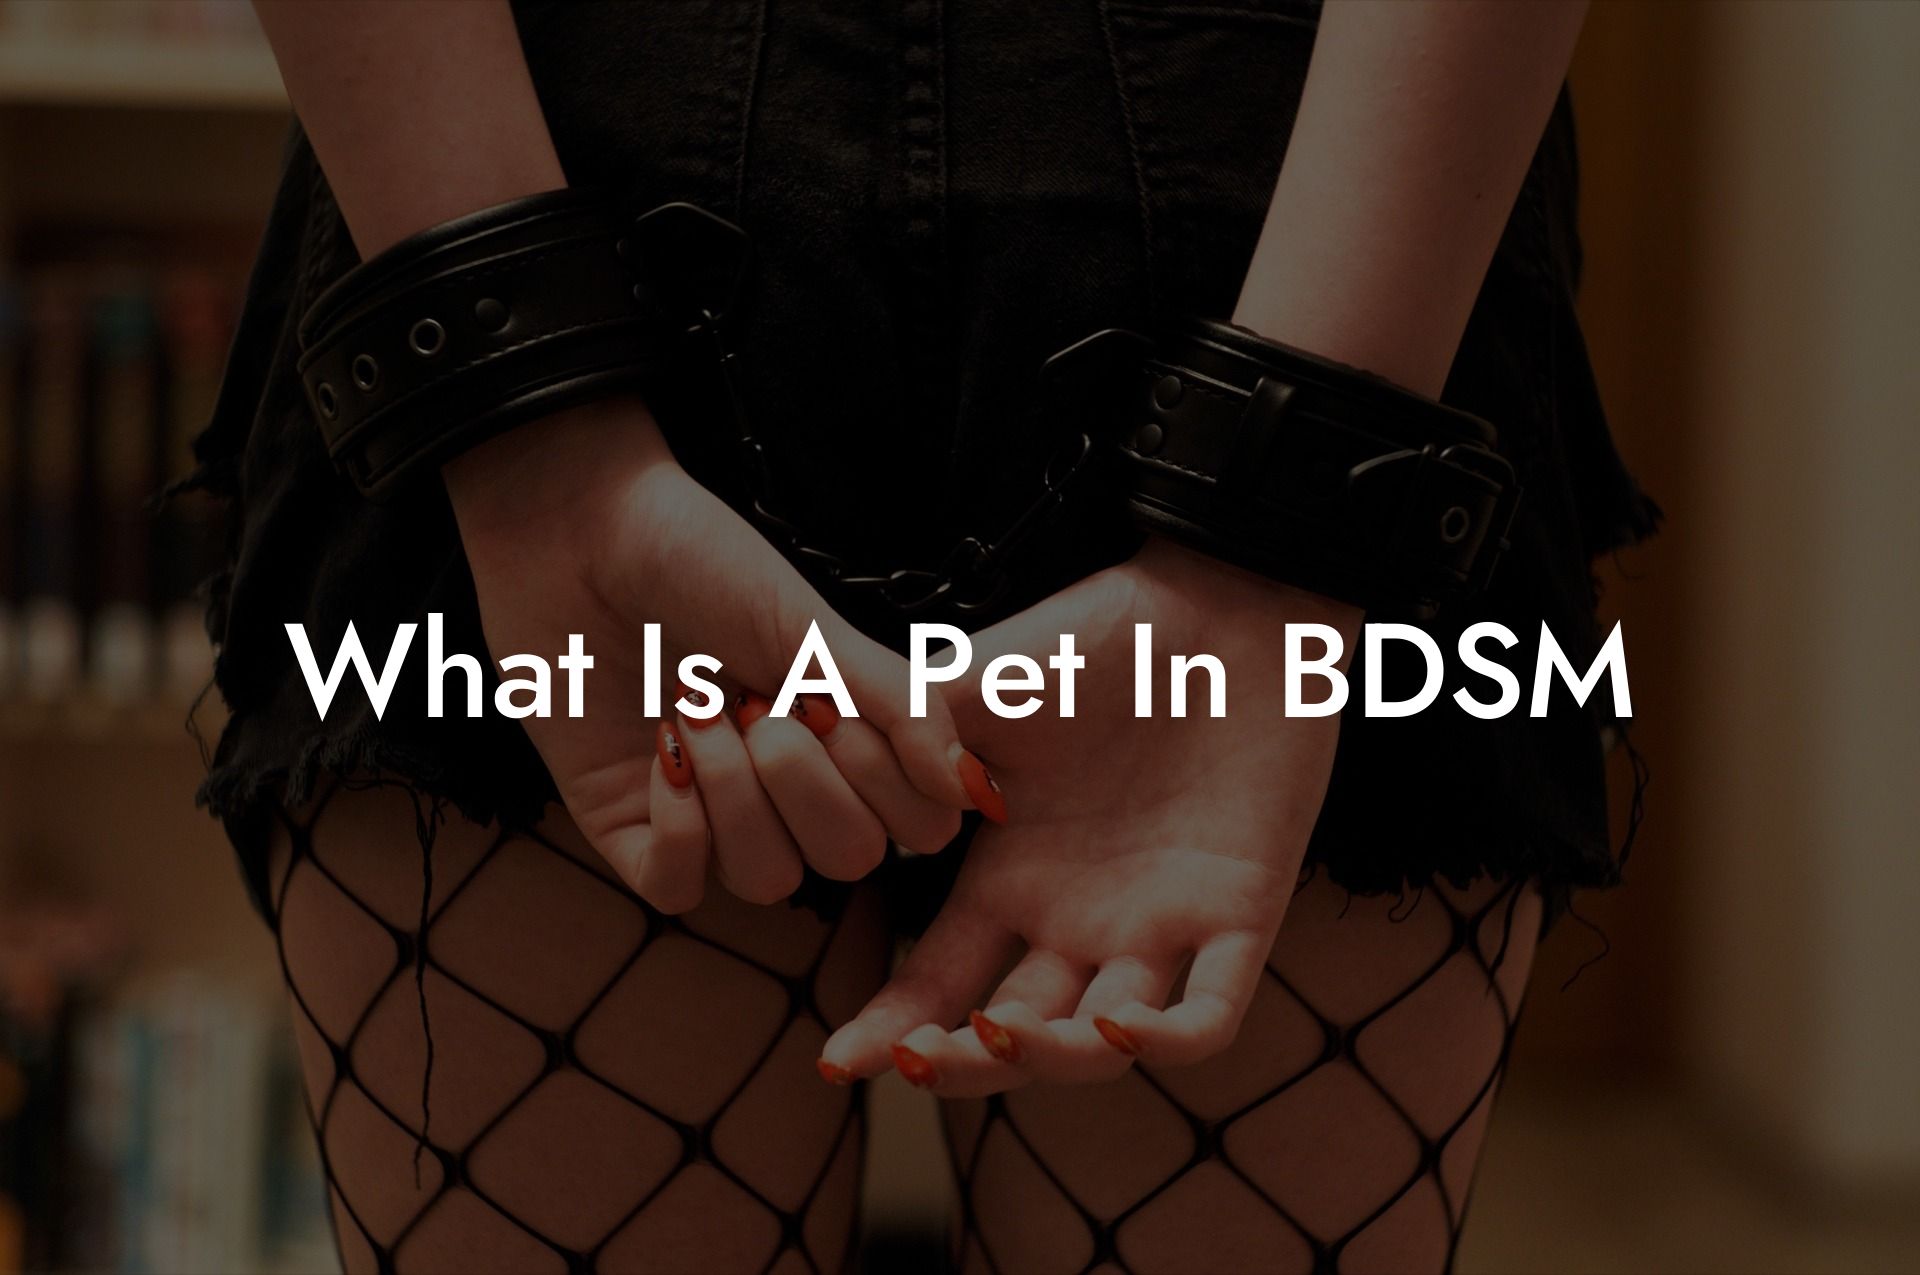 What Is A Pet In BDSM